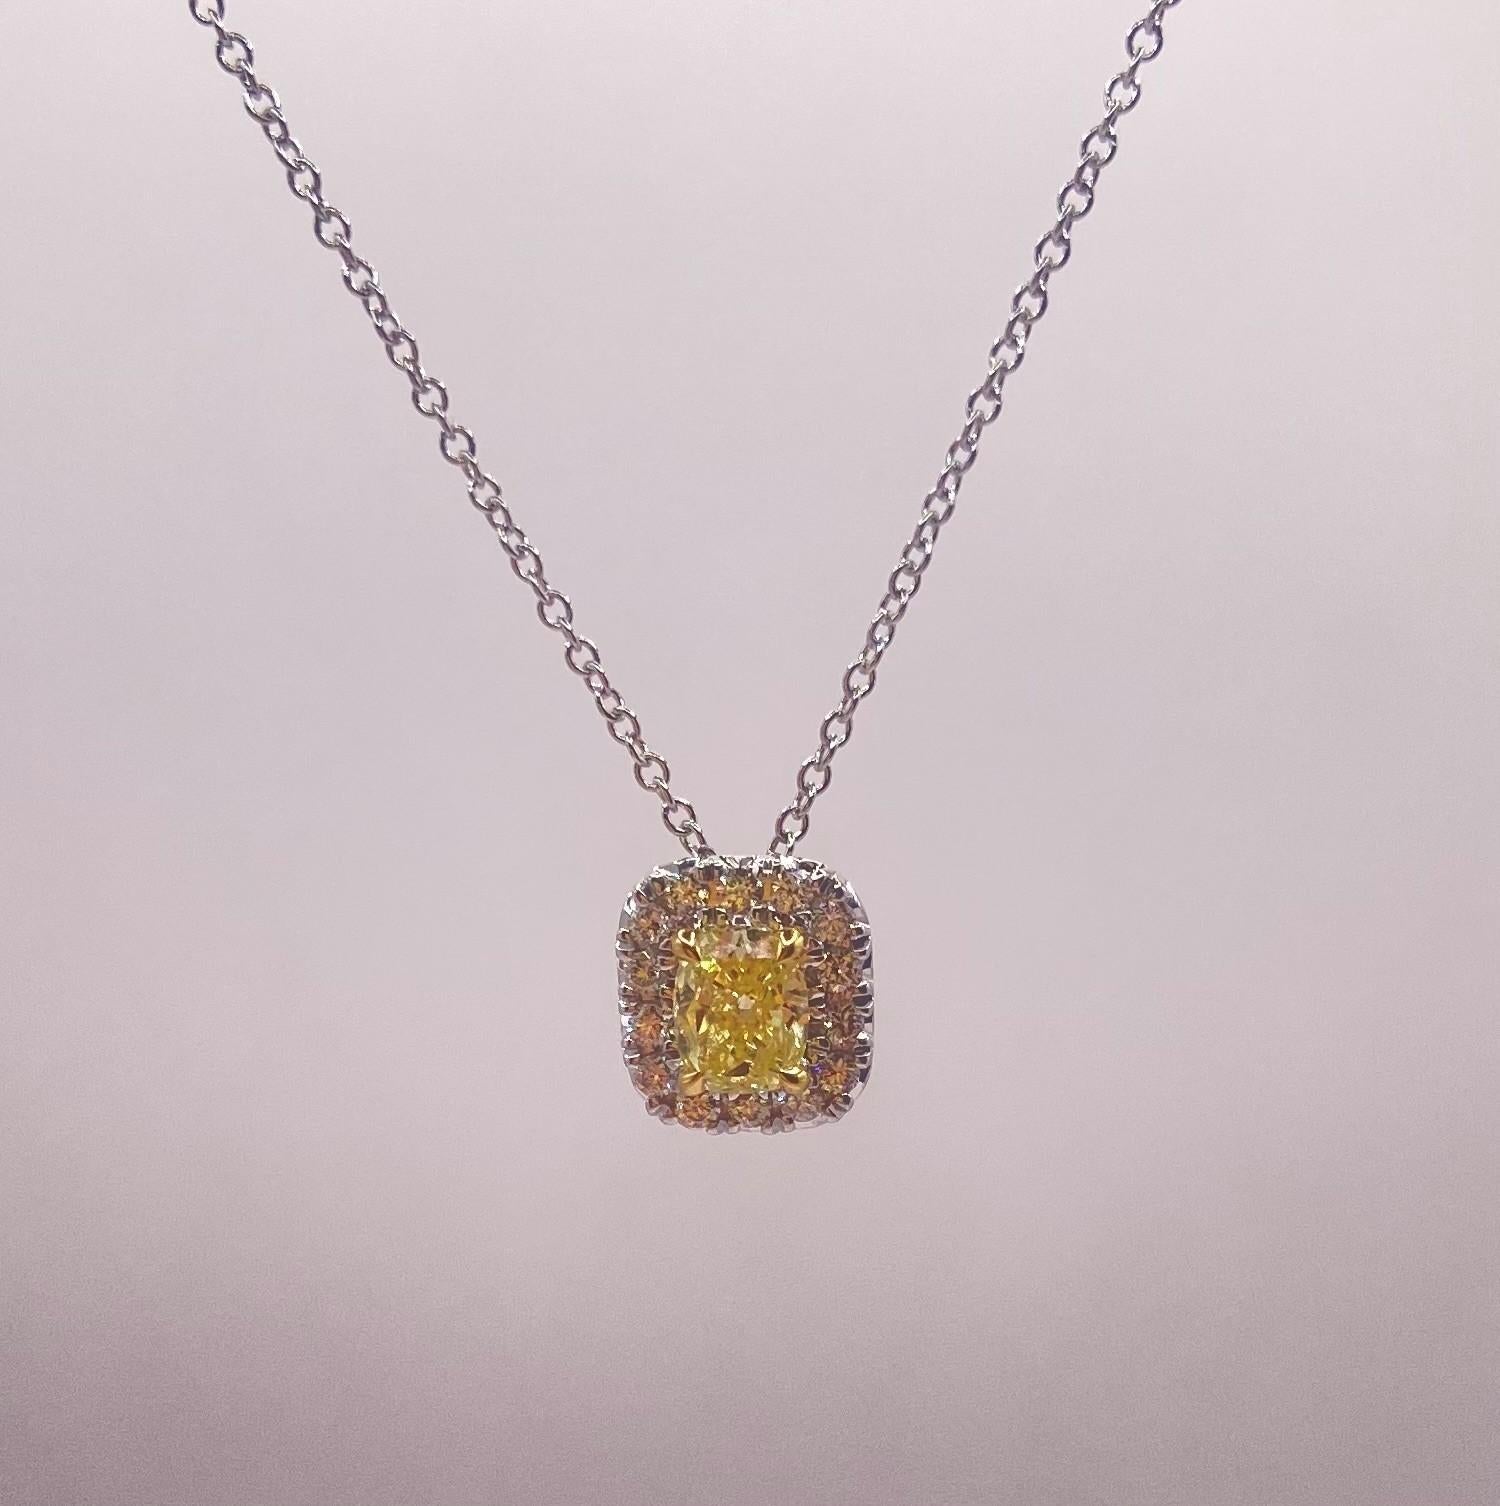 Metal: 18KT Two Tone
Total Carat Weight: 0.87ctw
Chain Length: 16